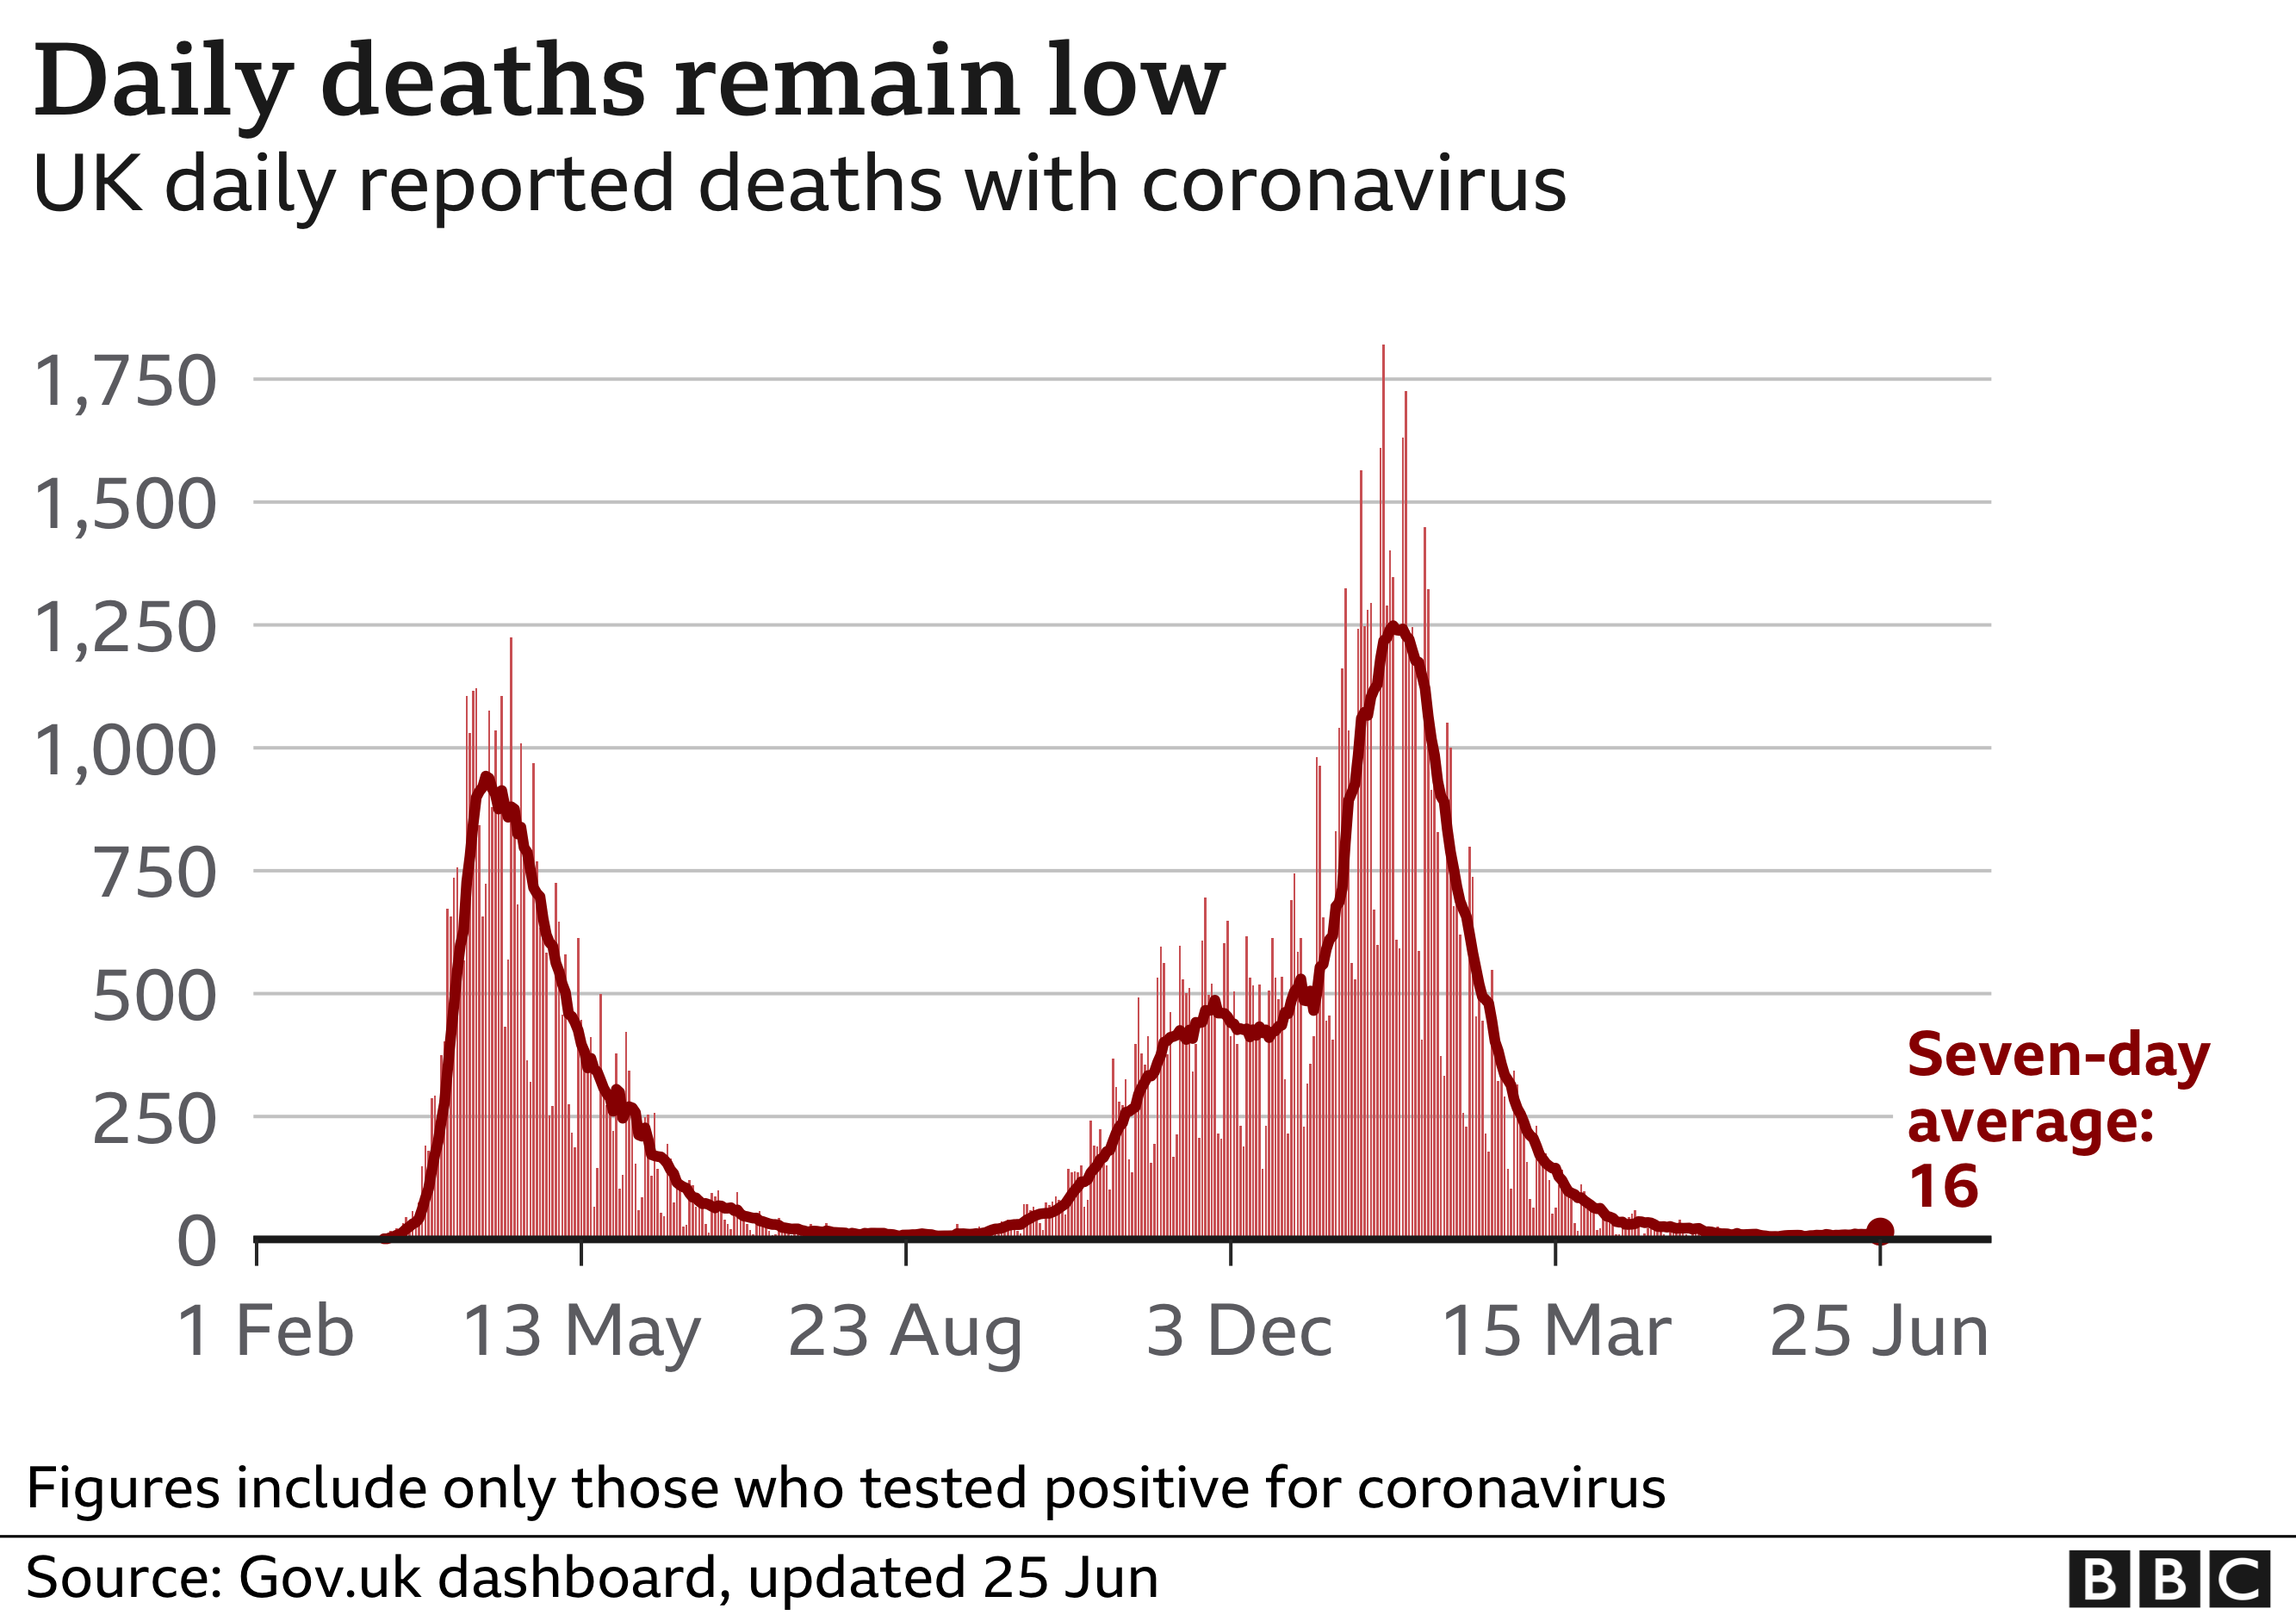 Chart shows daily deaths remain low